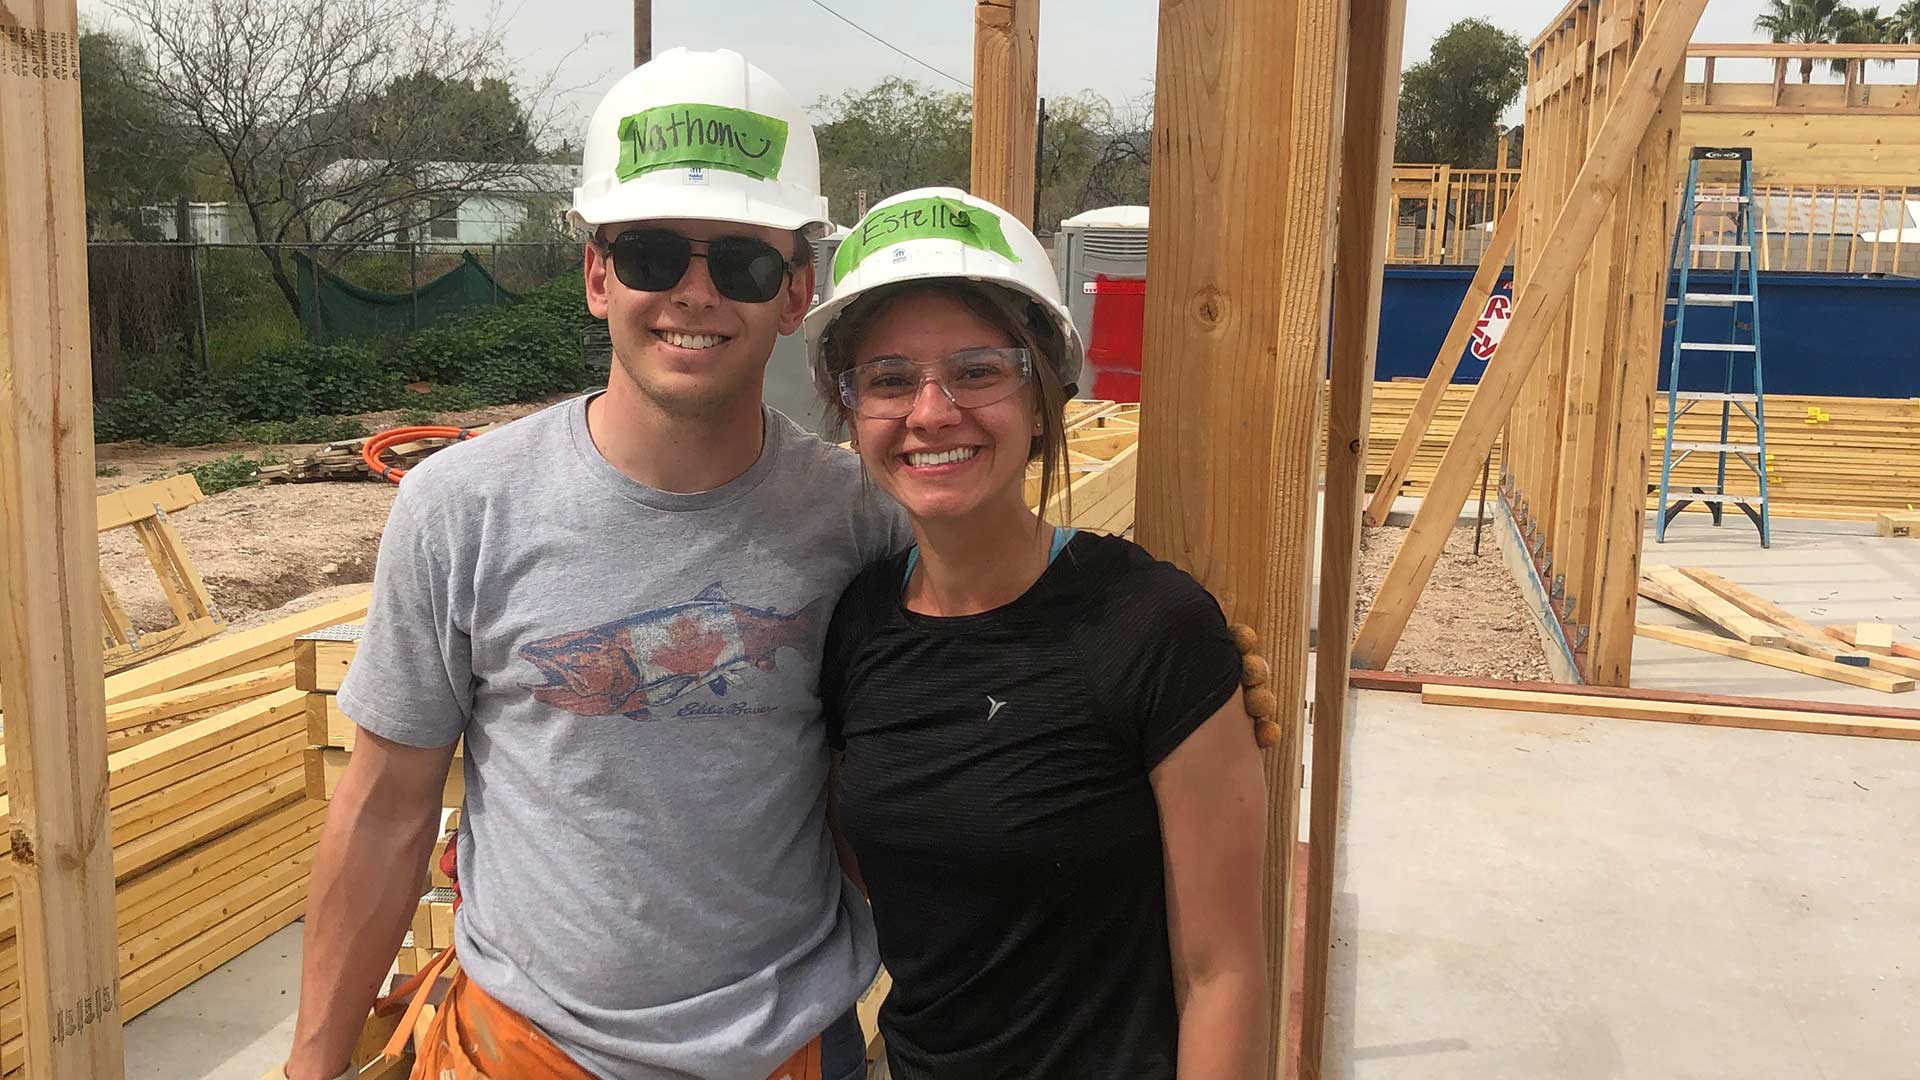 University of Arizona students Nathon Smith and Estelle Brugere in front of a wall they constructed at a Habitat for Humanity site in Tucson over spring break